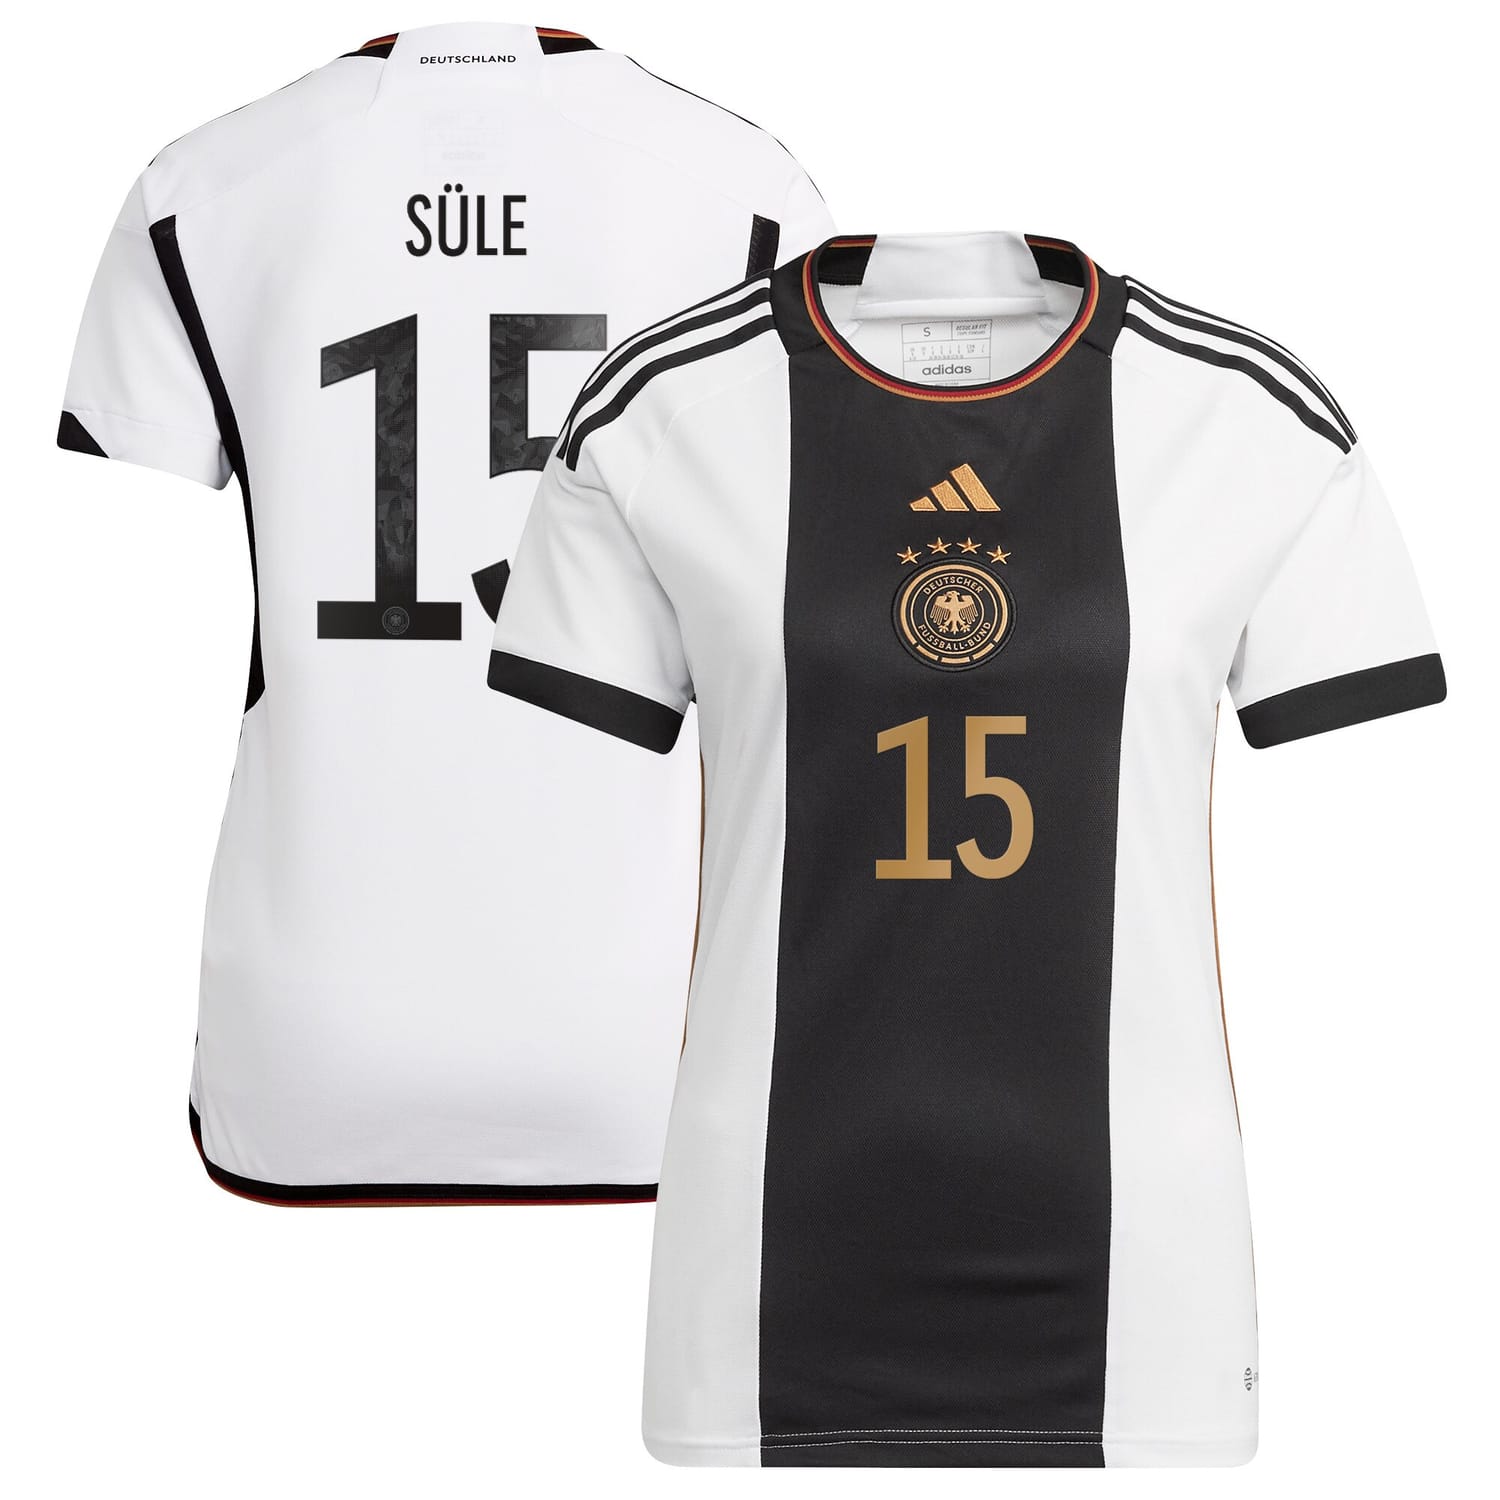 Germany National Team Home Jersey Shirt player Niklas Süle 15 printing for Women